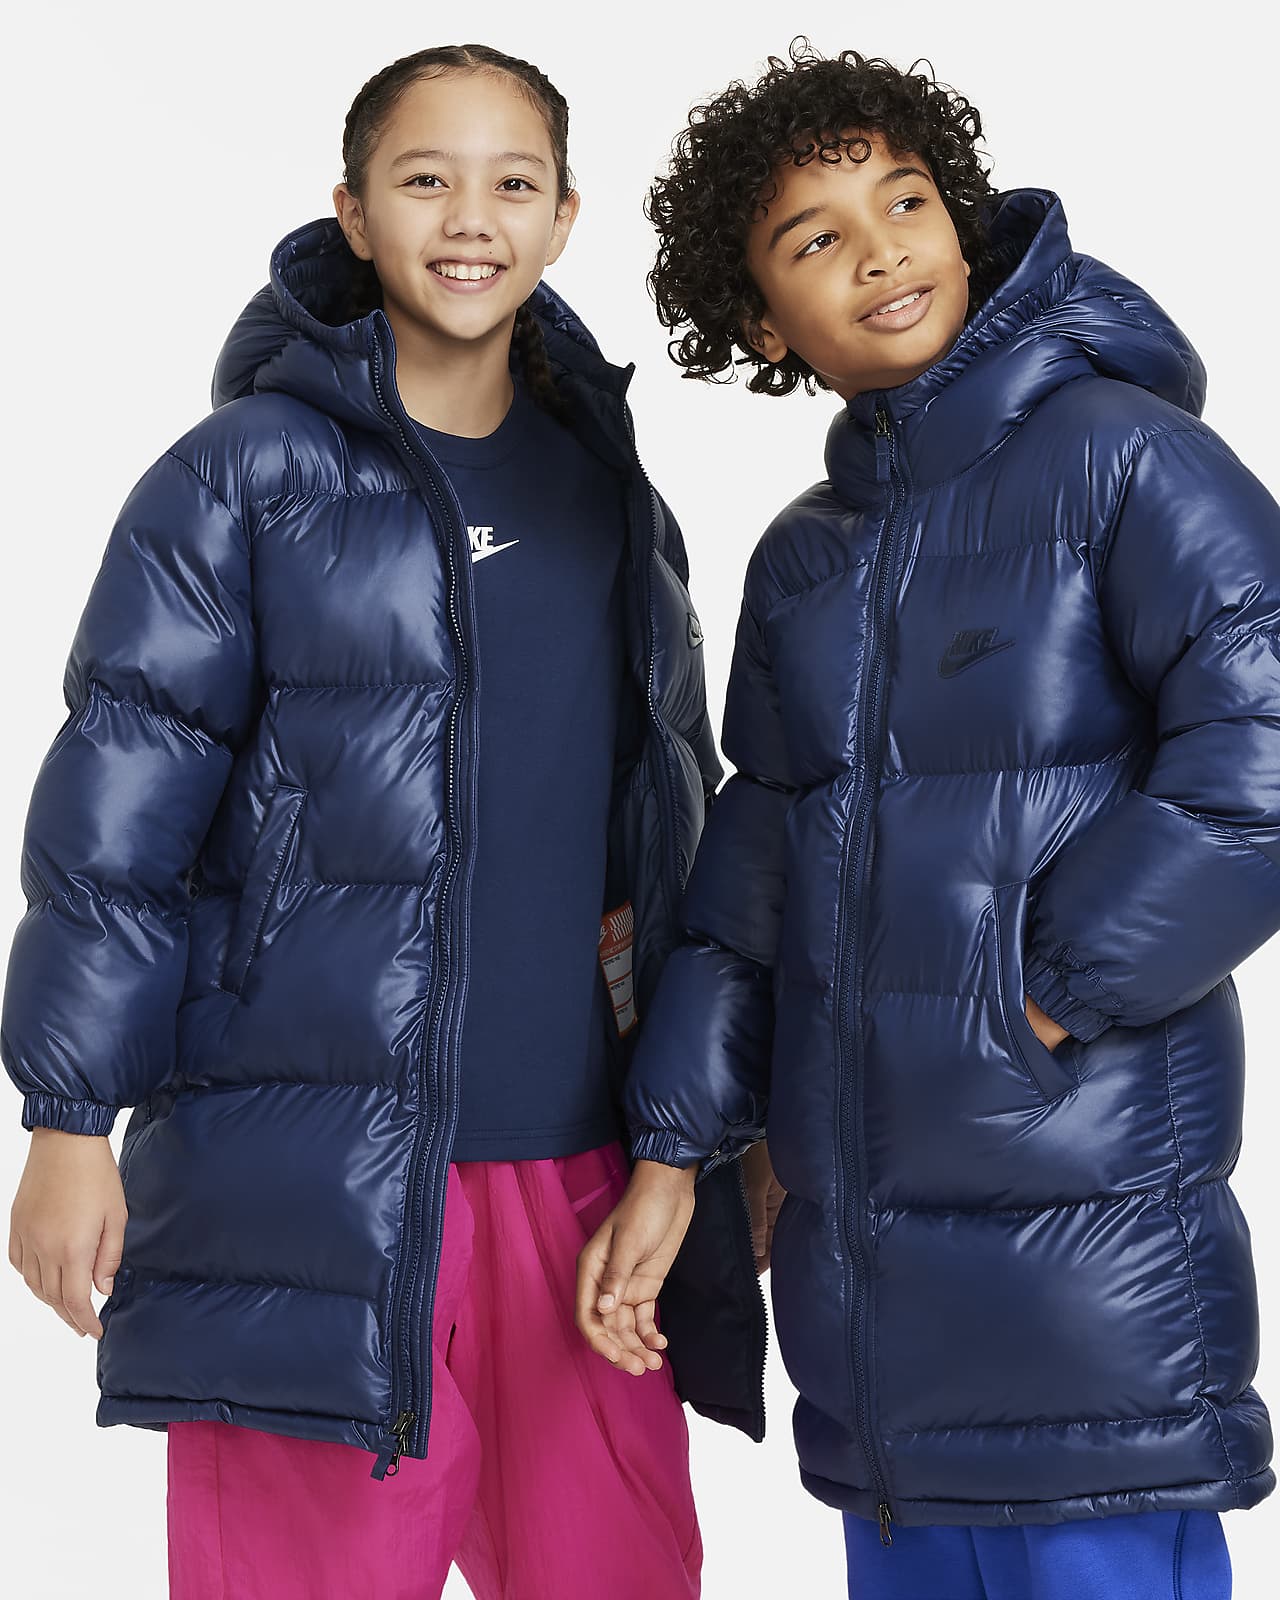 Cozy-Lined Thermore Parka, Compare